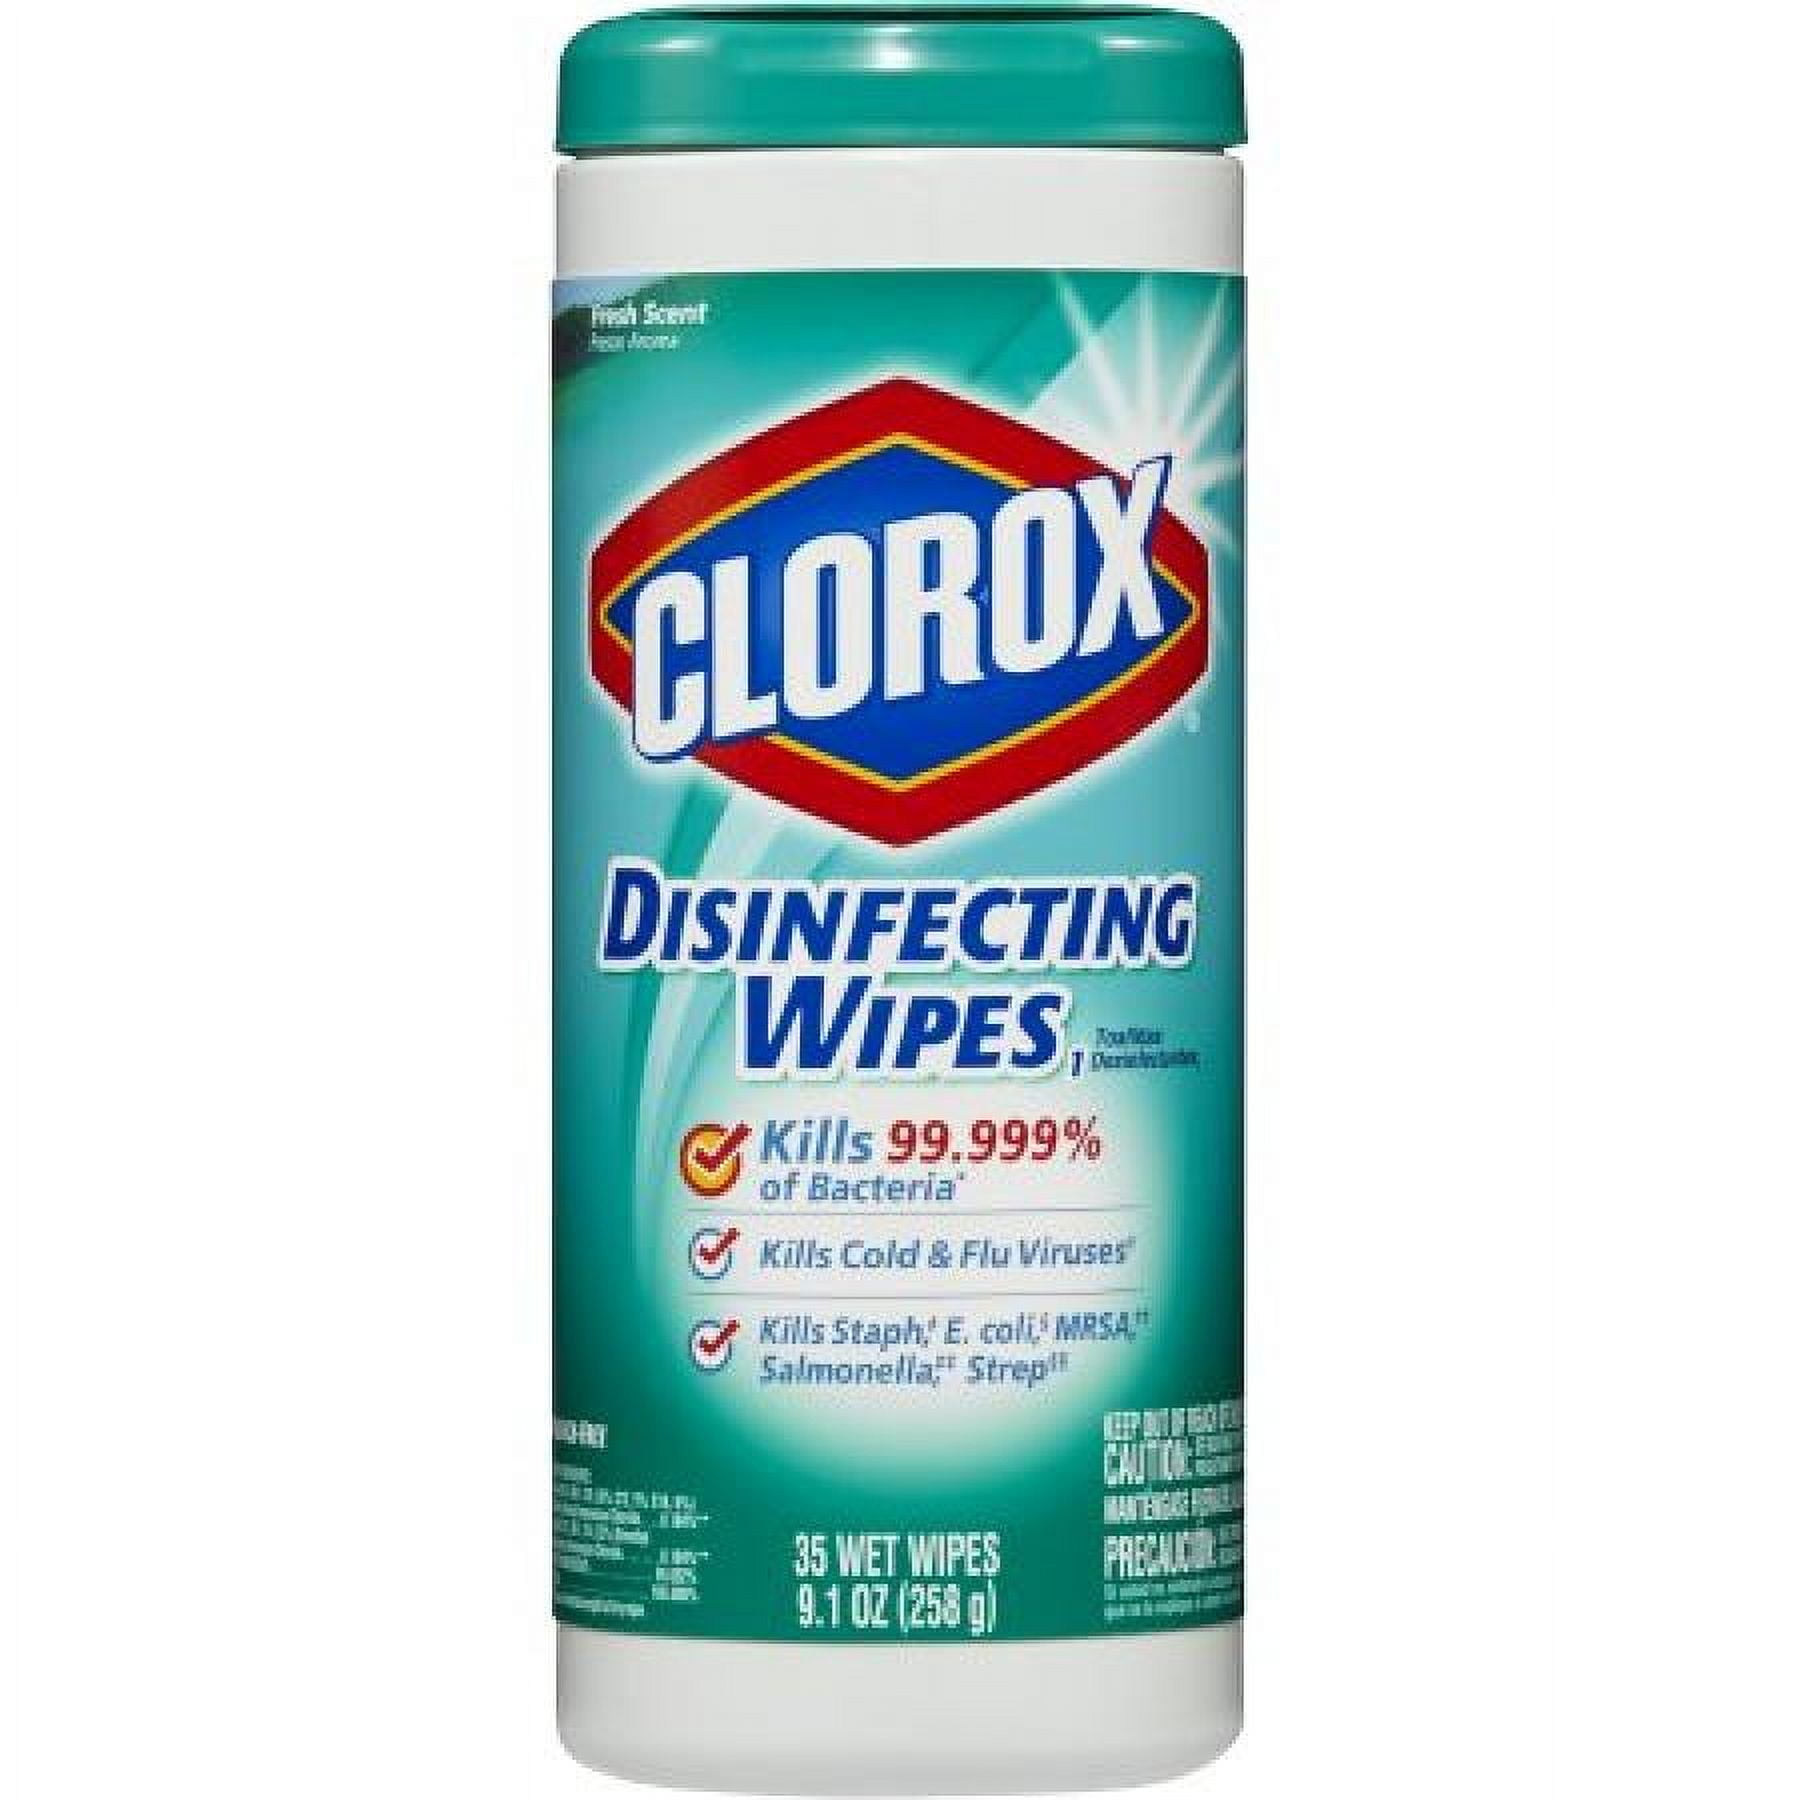 Clorox Wipes Cleaning and Disinfectant Tips